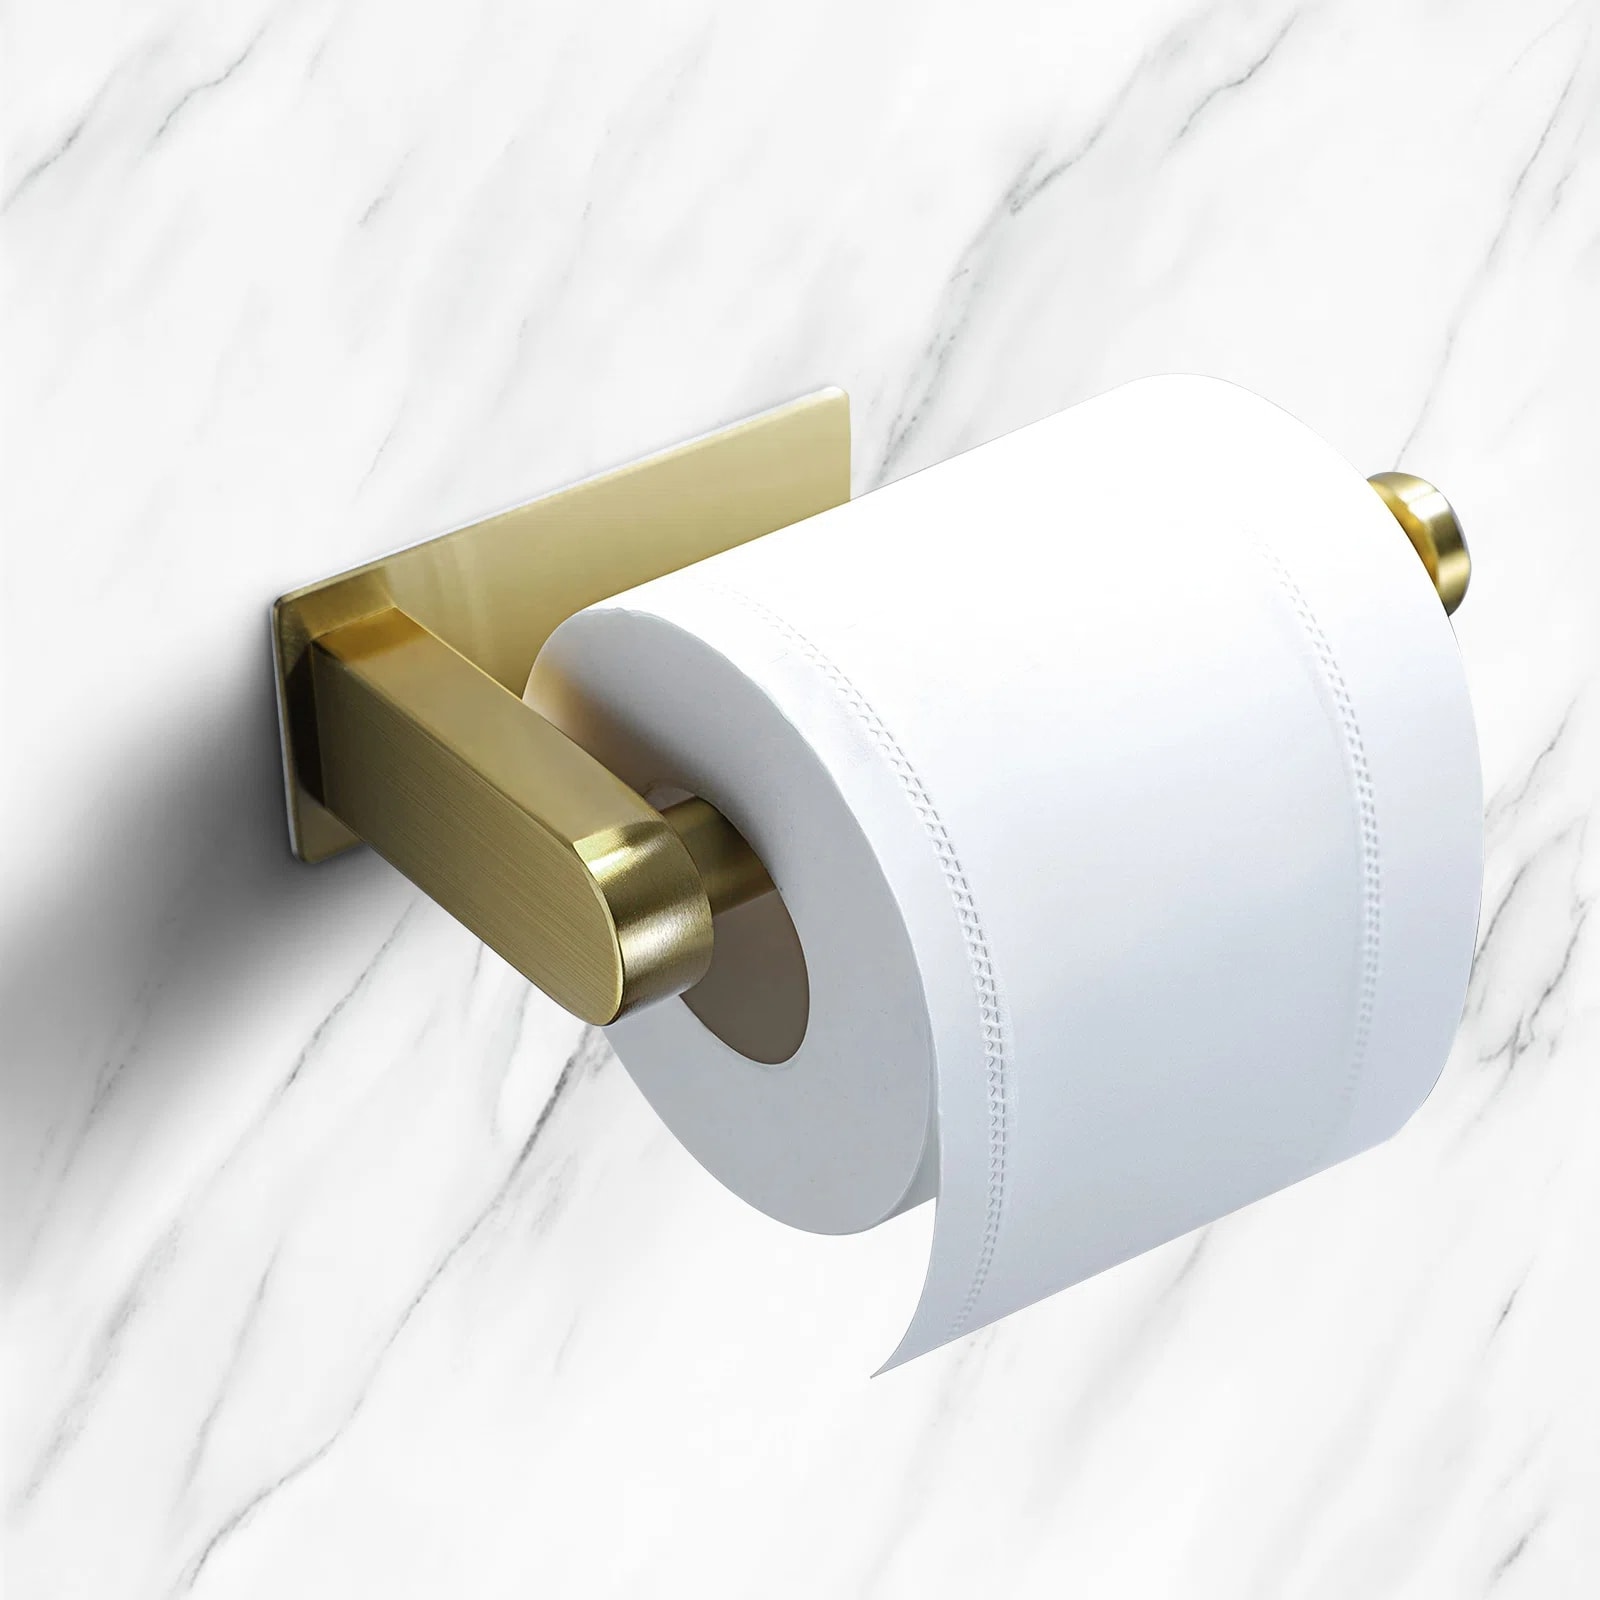 https://ak1.ostkcdn.com/images/products/is/images/direct/2a8d6bb6717f20b516a415fa1edfbeba1faef315/Vanityfair-Self-Adhesive-Wall-Mounted-Toilet-Paper-Holder.jpg